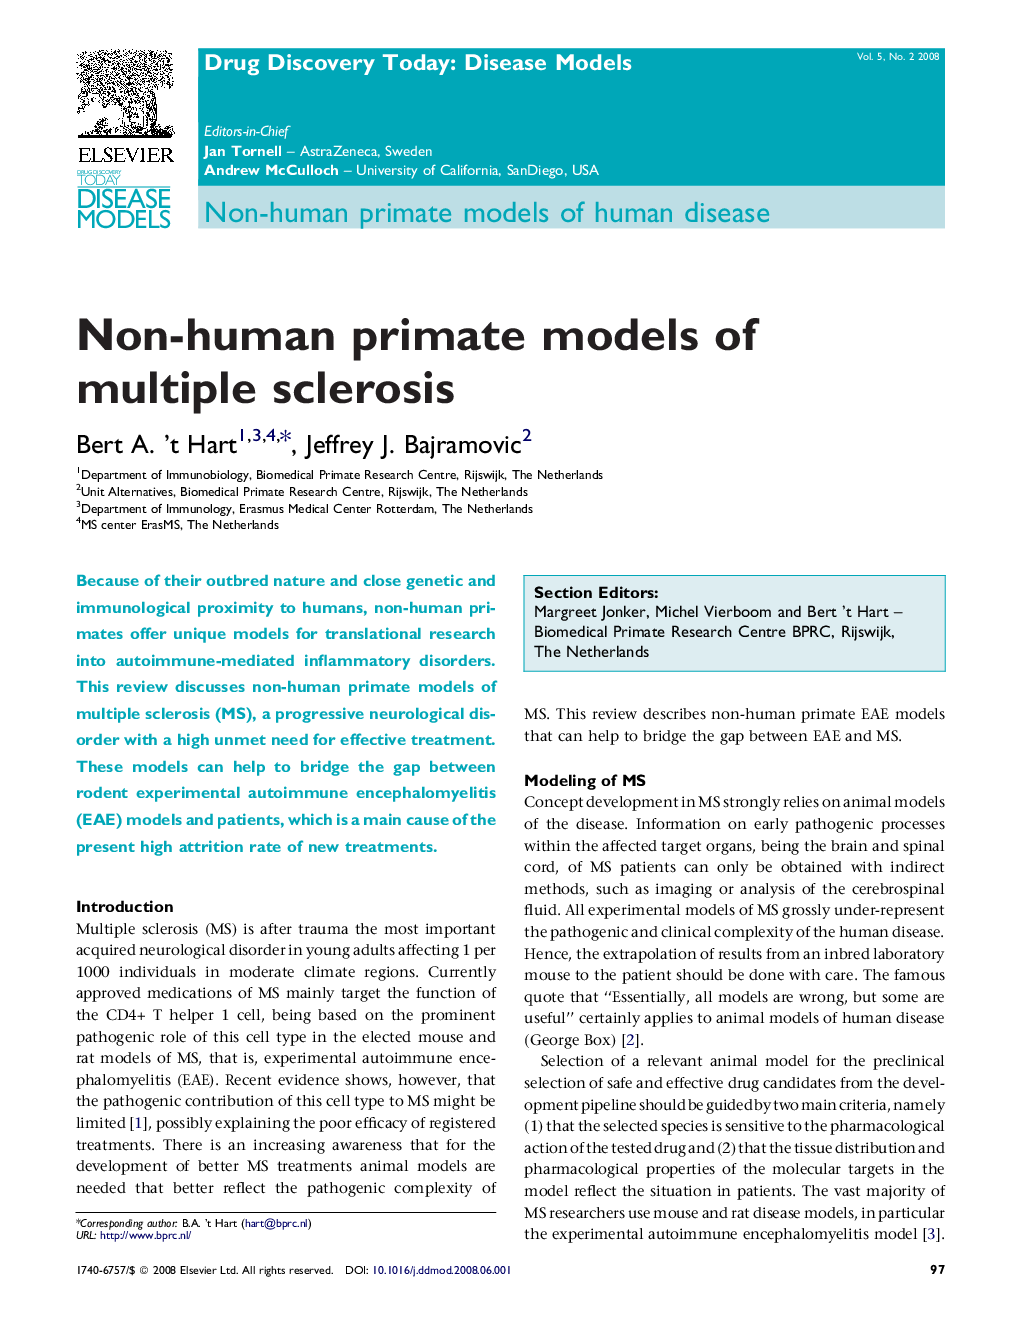 Non-human primate models of multiple sclerosis